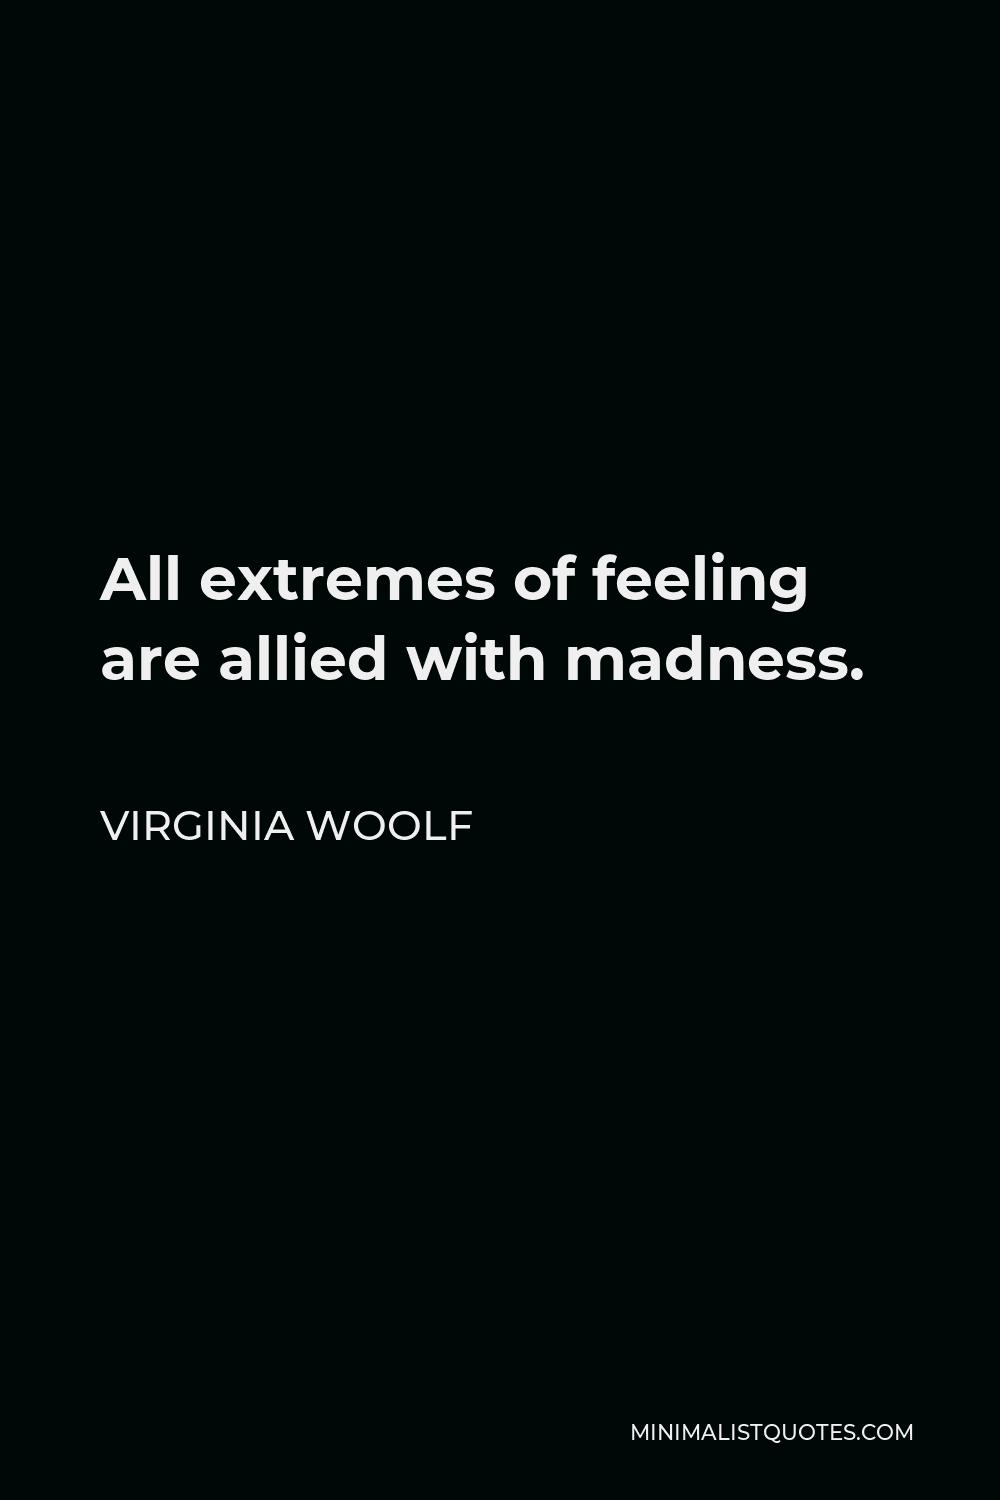 Virginia Woolf Quote - All extremes of feeling are allied with madness.